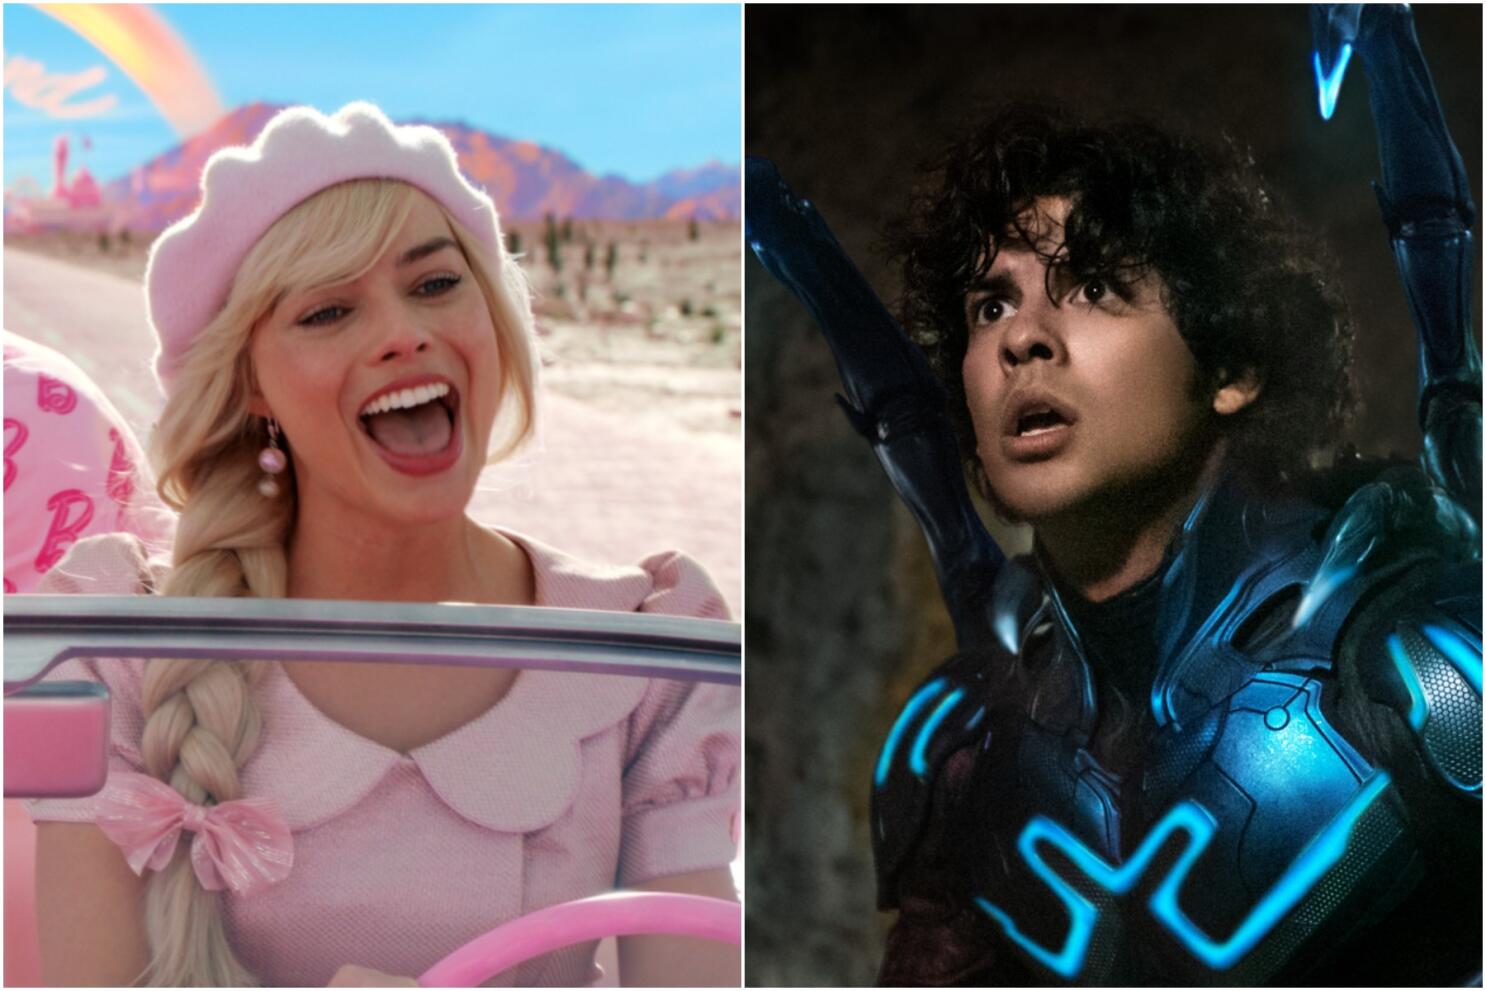 Blue Beetle' squashes 'Barbie' as No. 1 movie at the box office